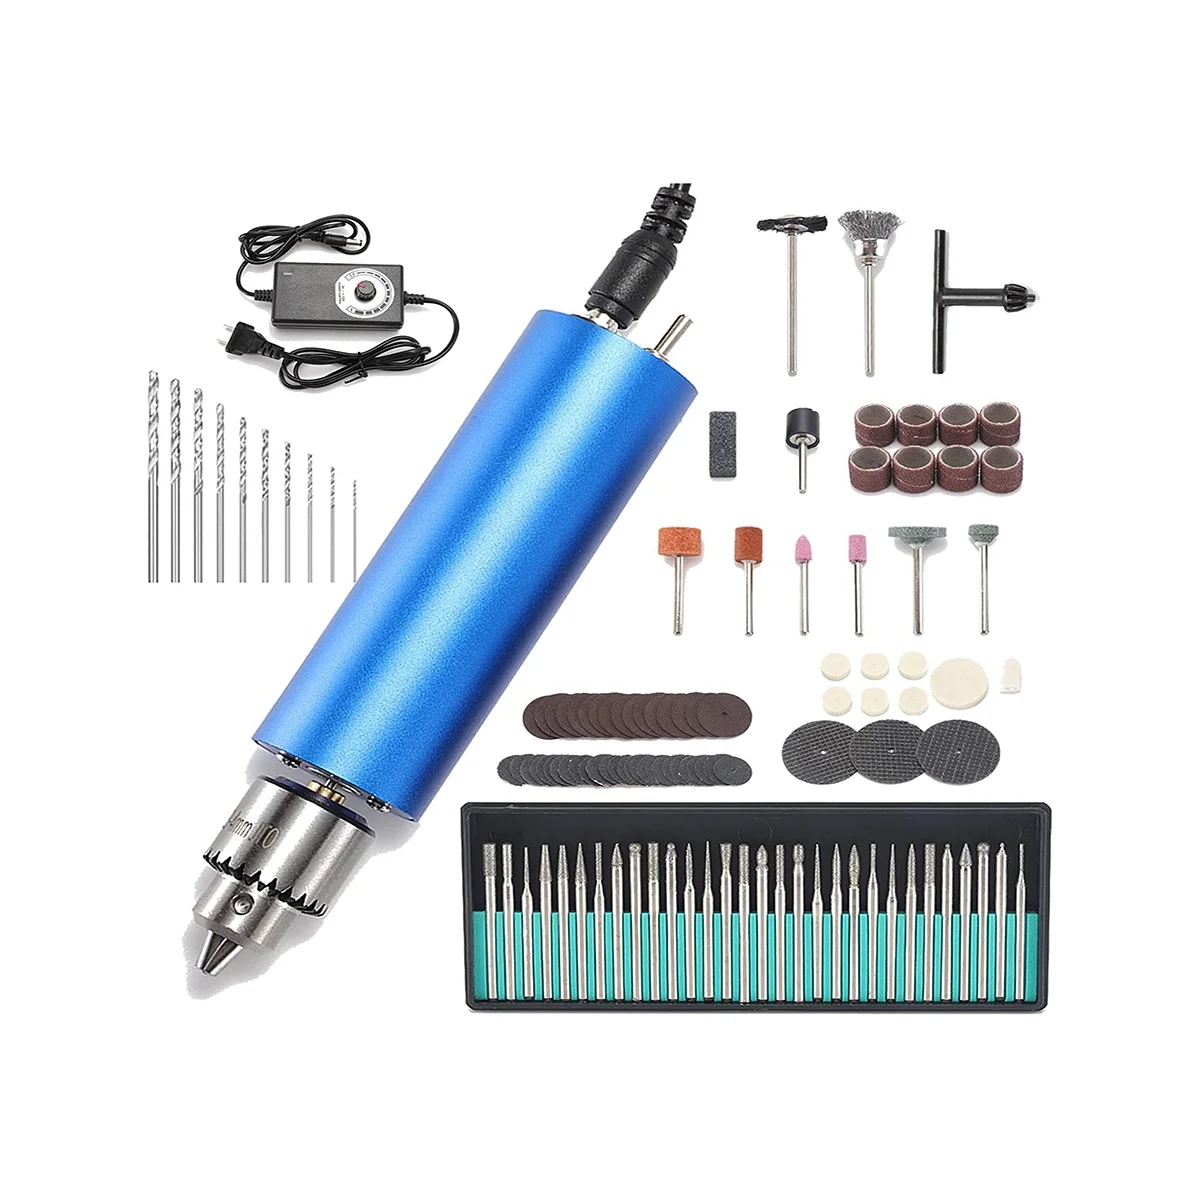 

Engraver Pen Handheld for Wood Metal Glass Engraving with 108Pcs Replaceable Tungsten Carbide Steel Bits US Plug